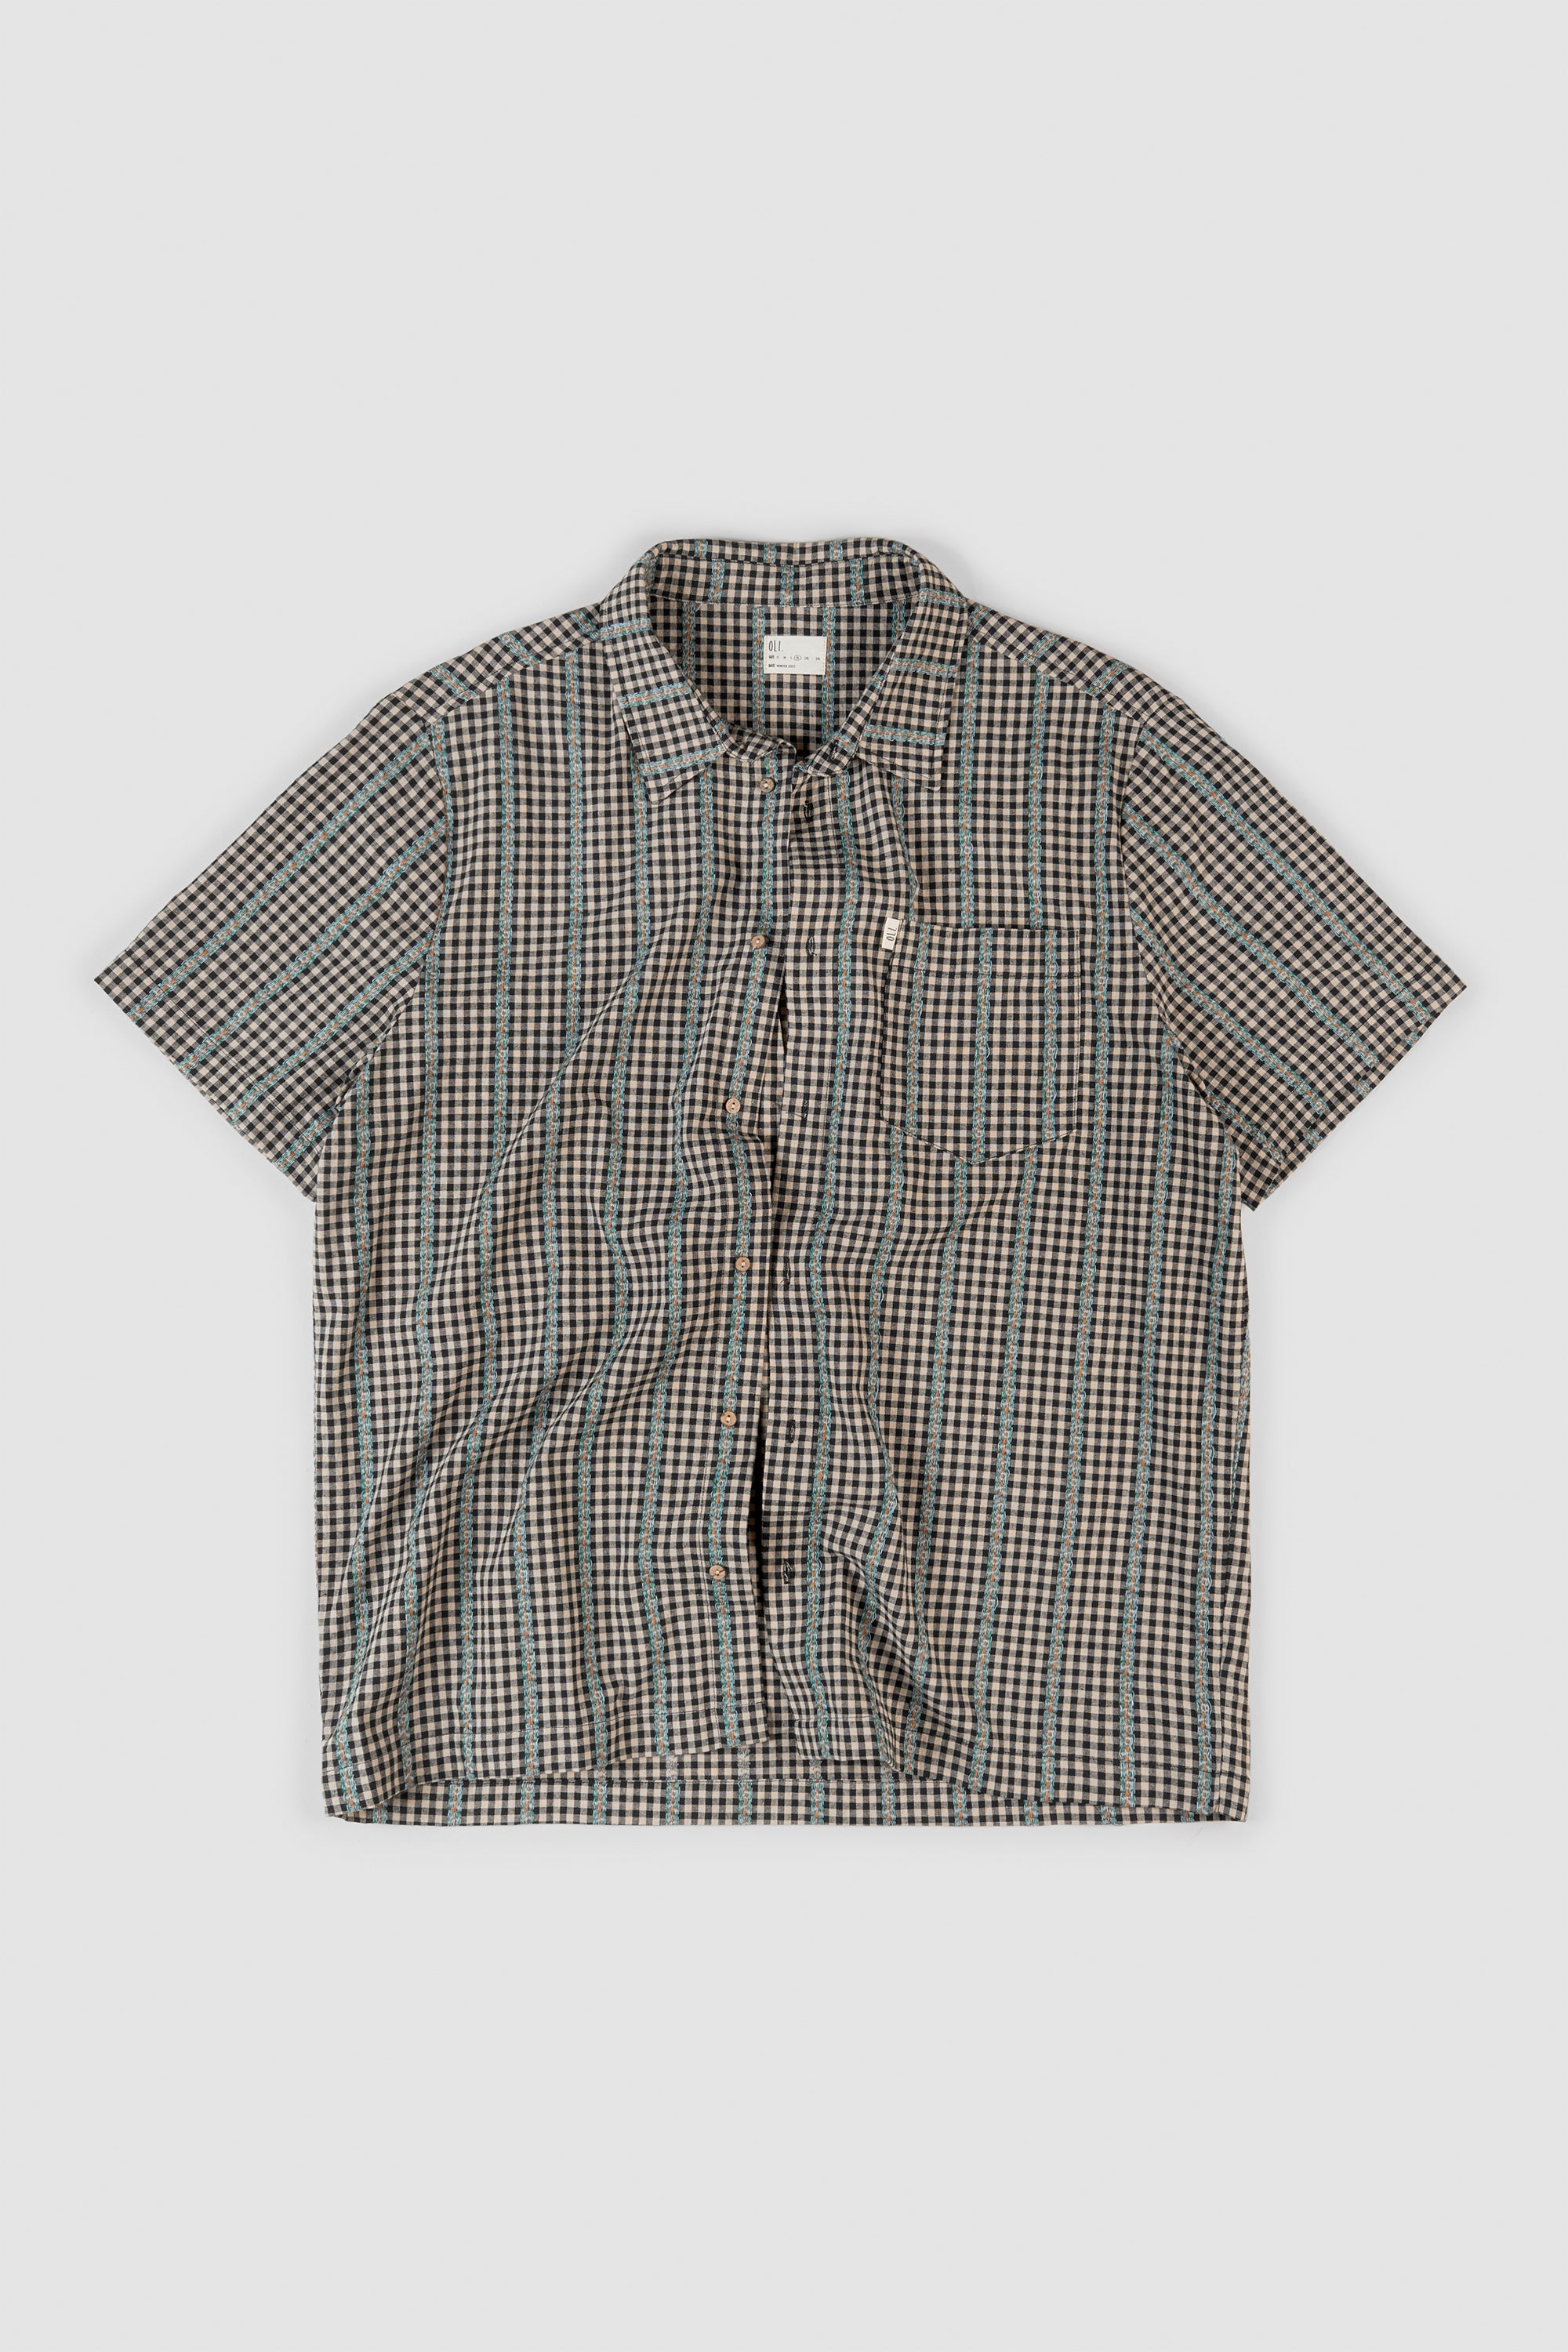 Vintage Check Button Up